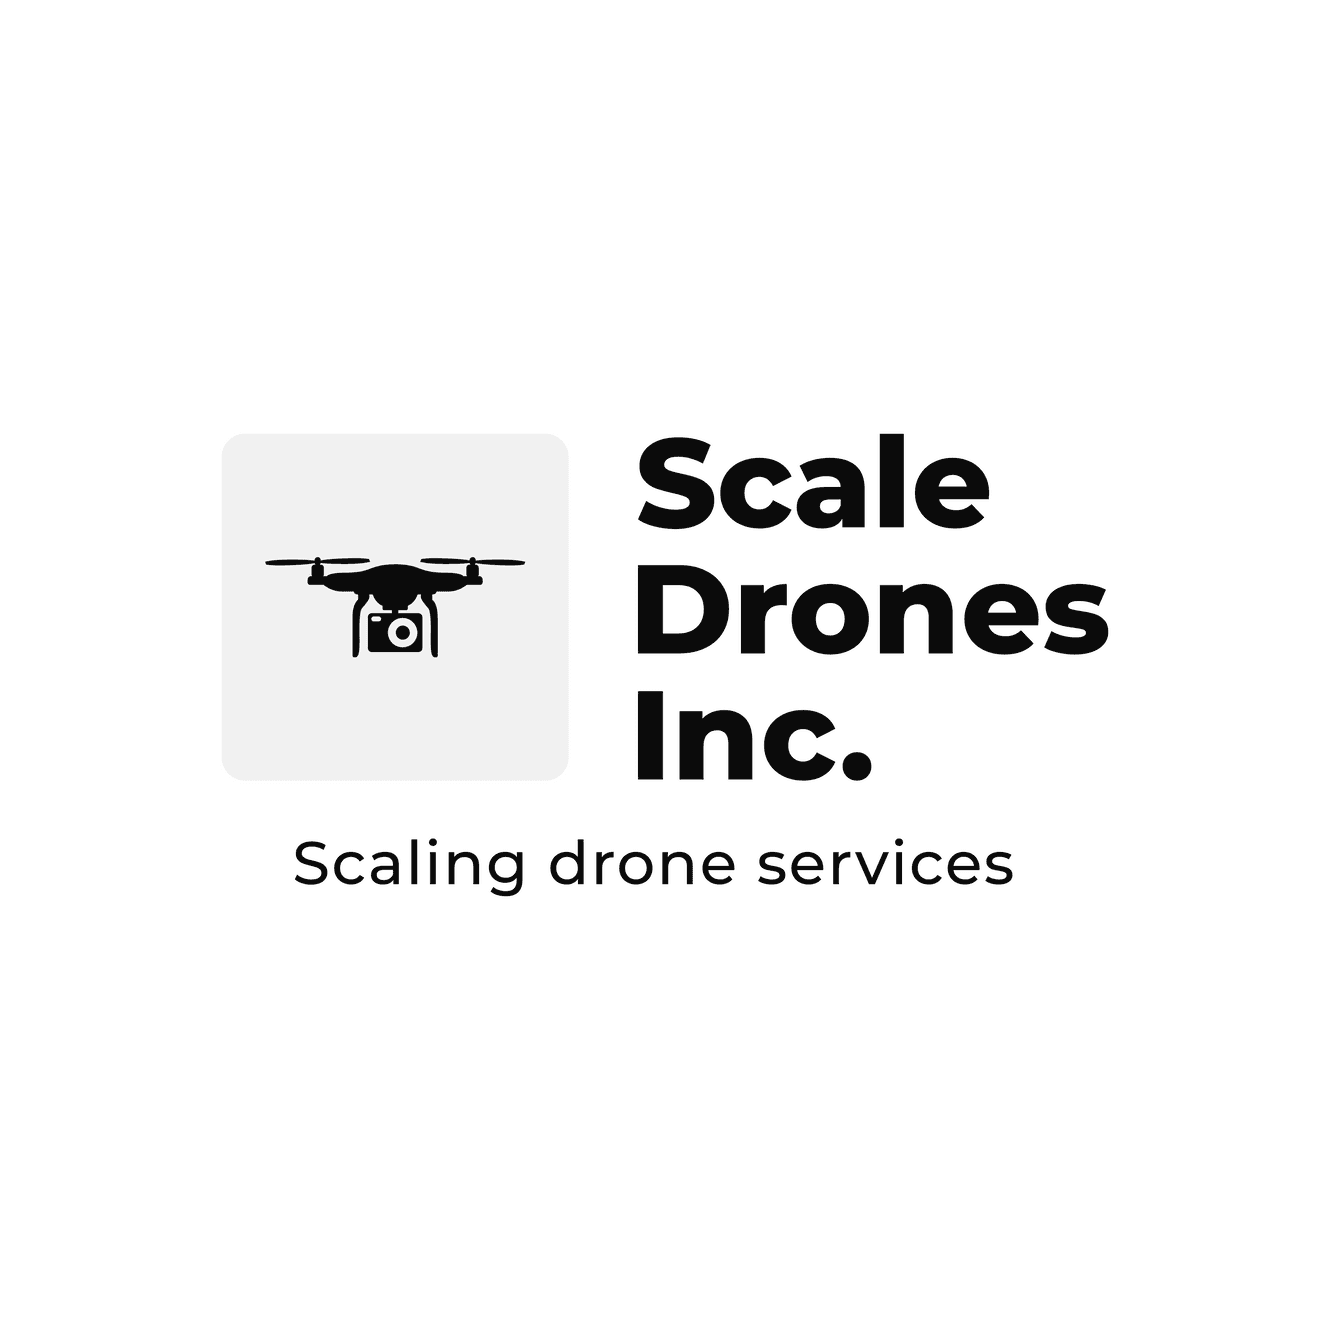 Product Services | Scale Drones Inc. image